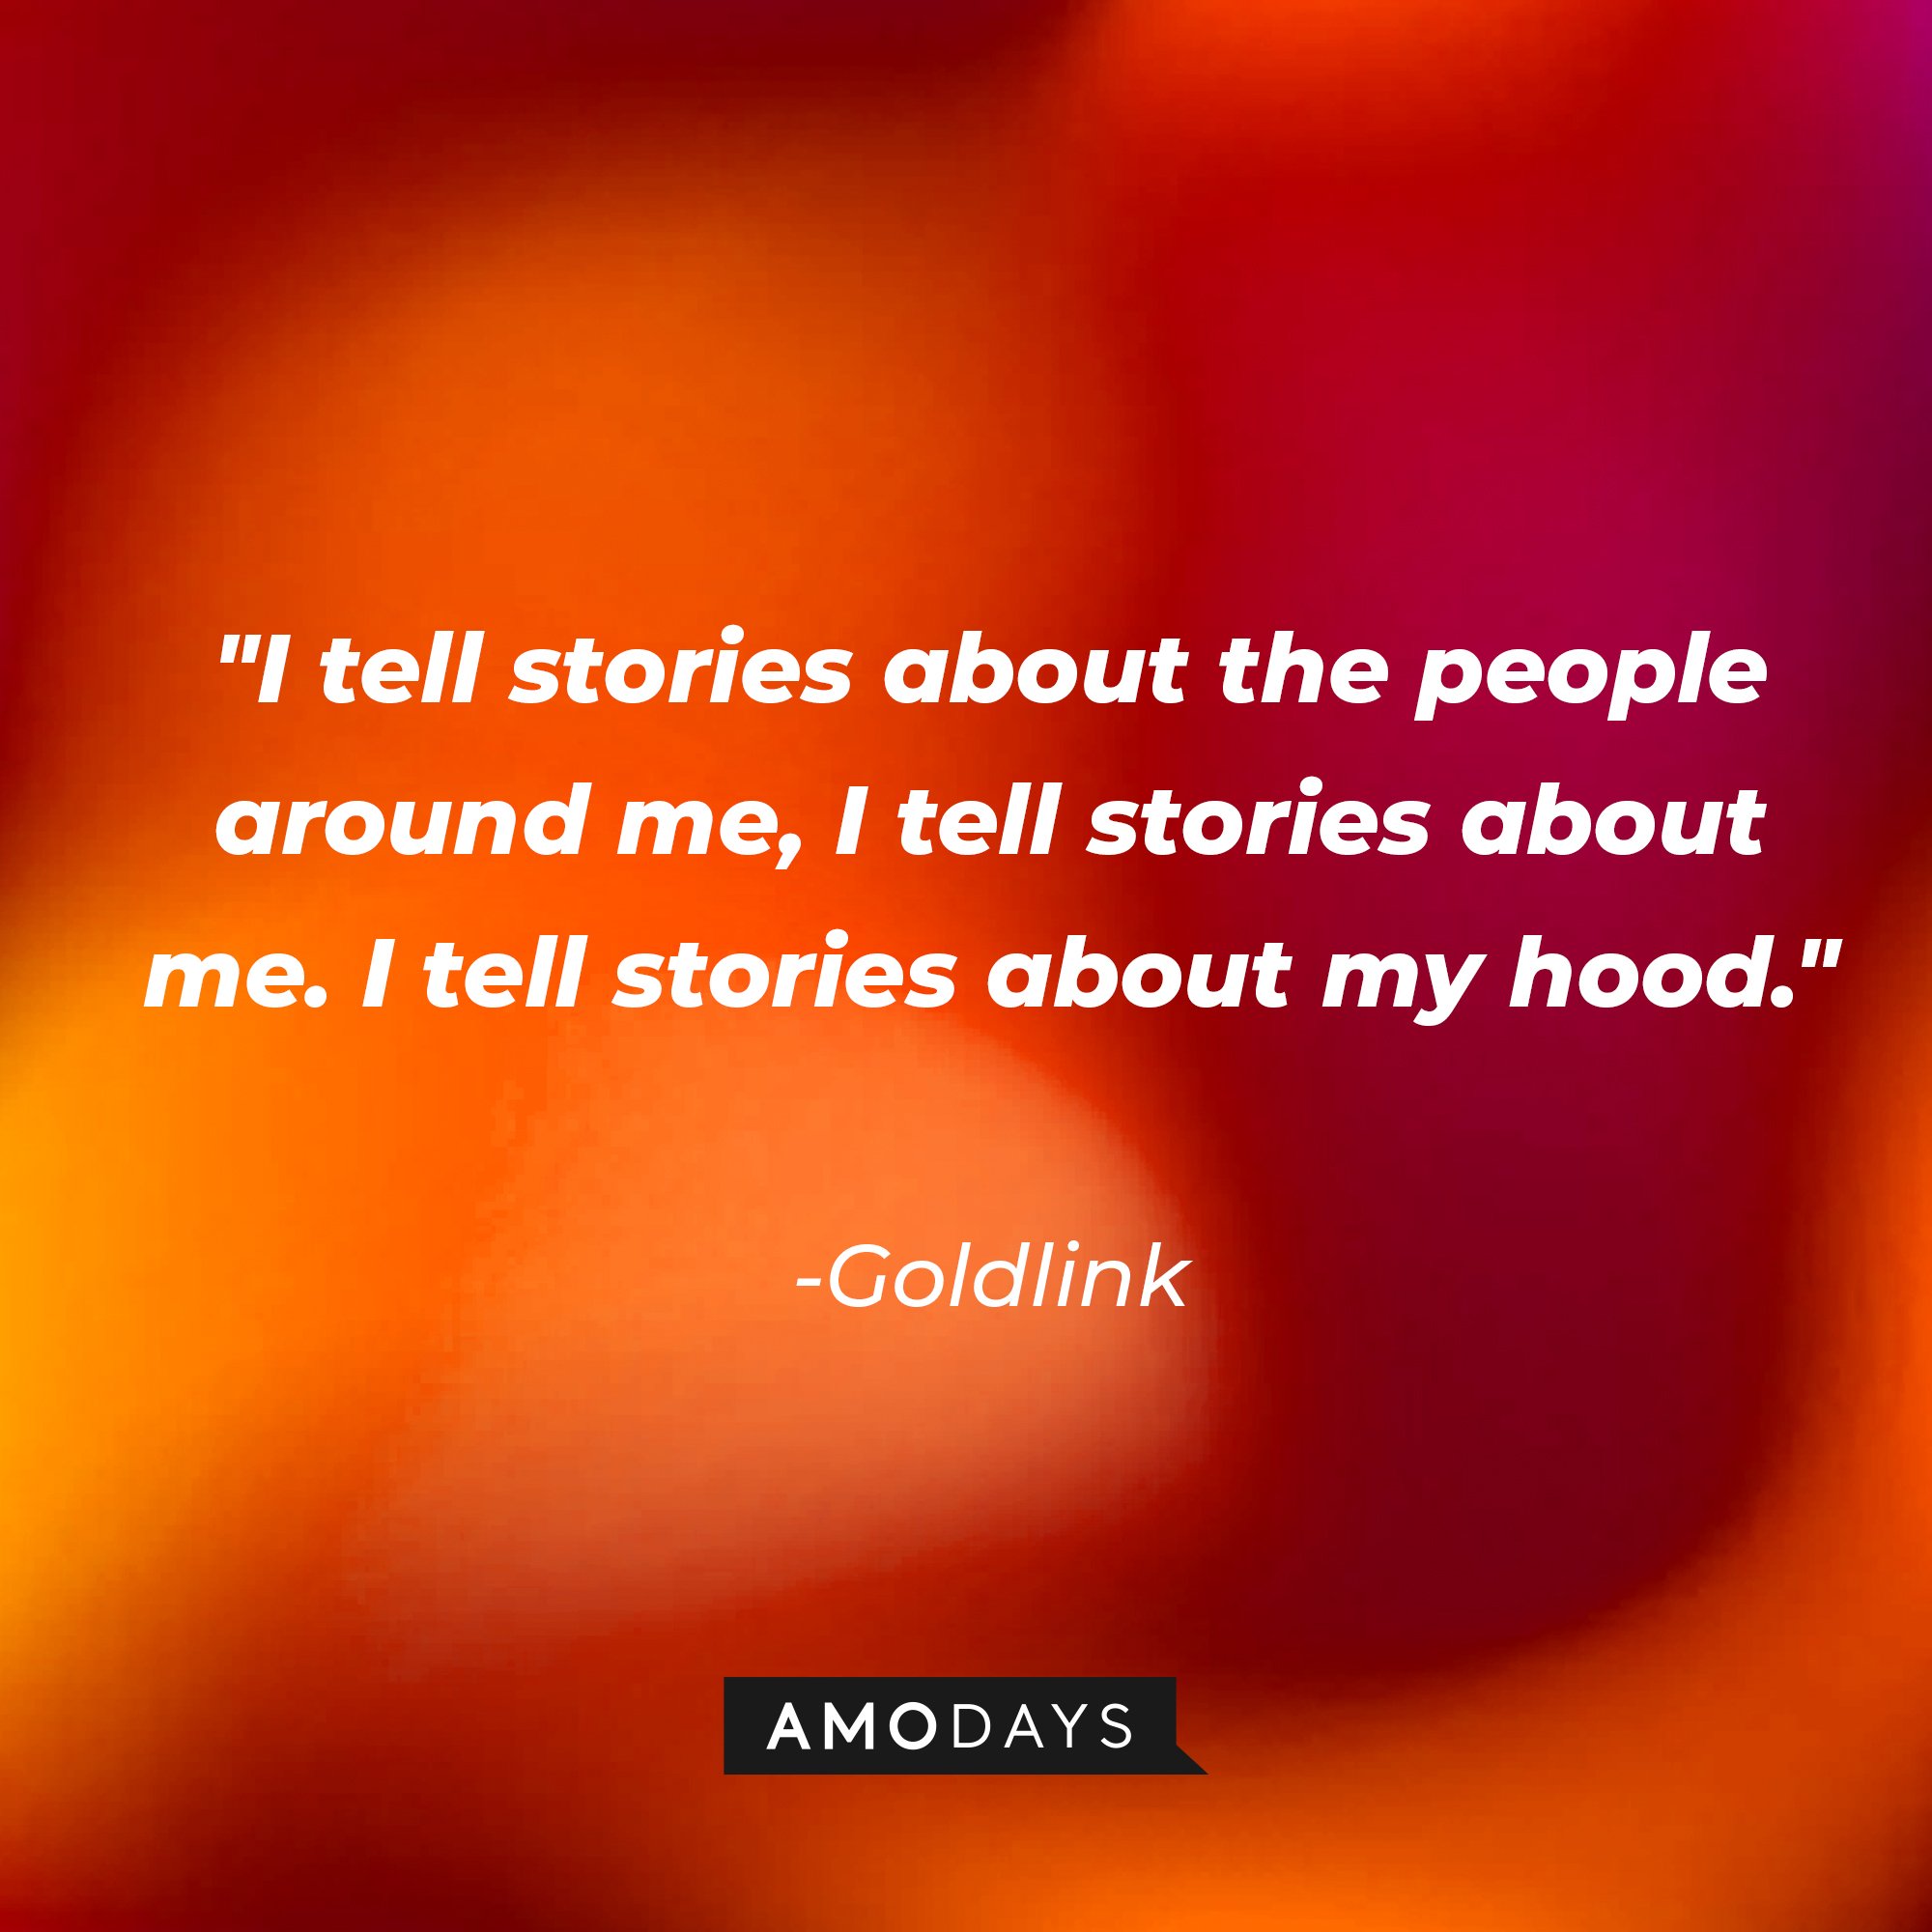 Goldlink's quote: "I tell stories about the people around me, I tell stories about me. I tell stories about my hood." | Image: AmoDays